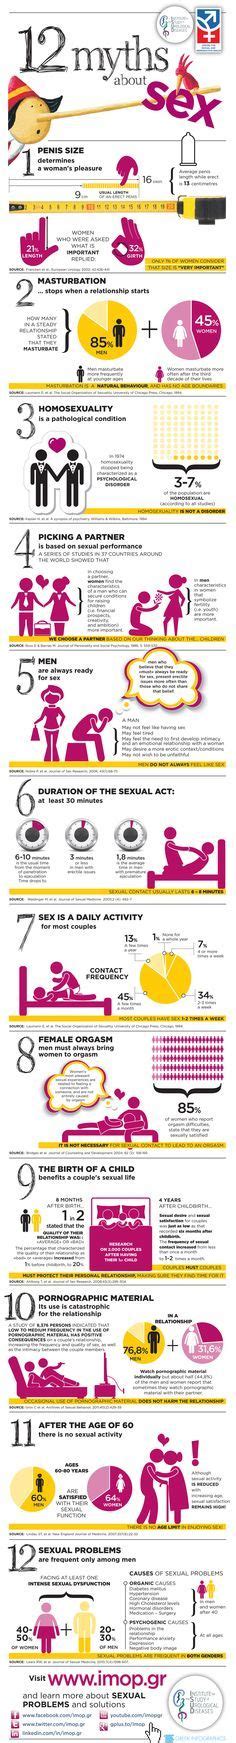 Psychology 12 Myths About Sex Infographic Sex Myths Relationships